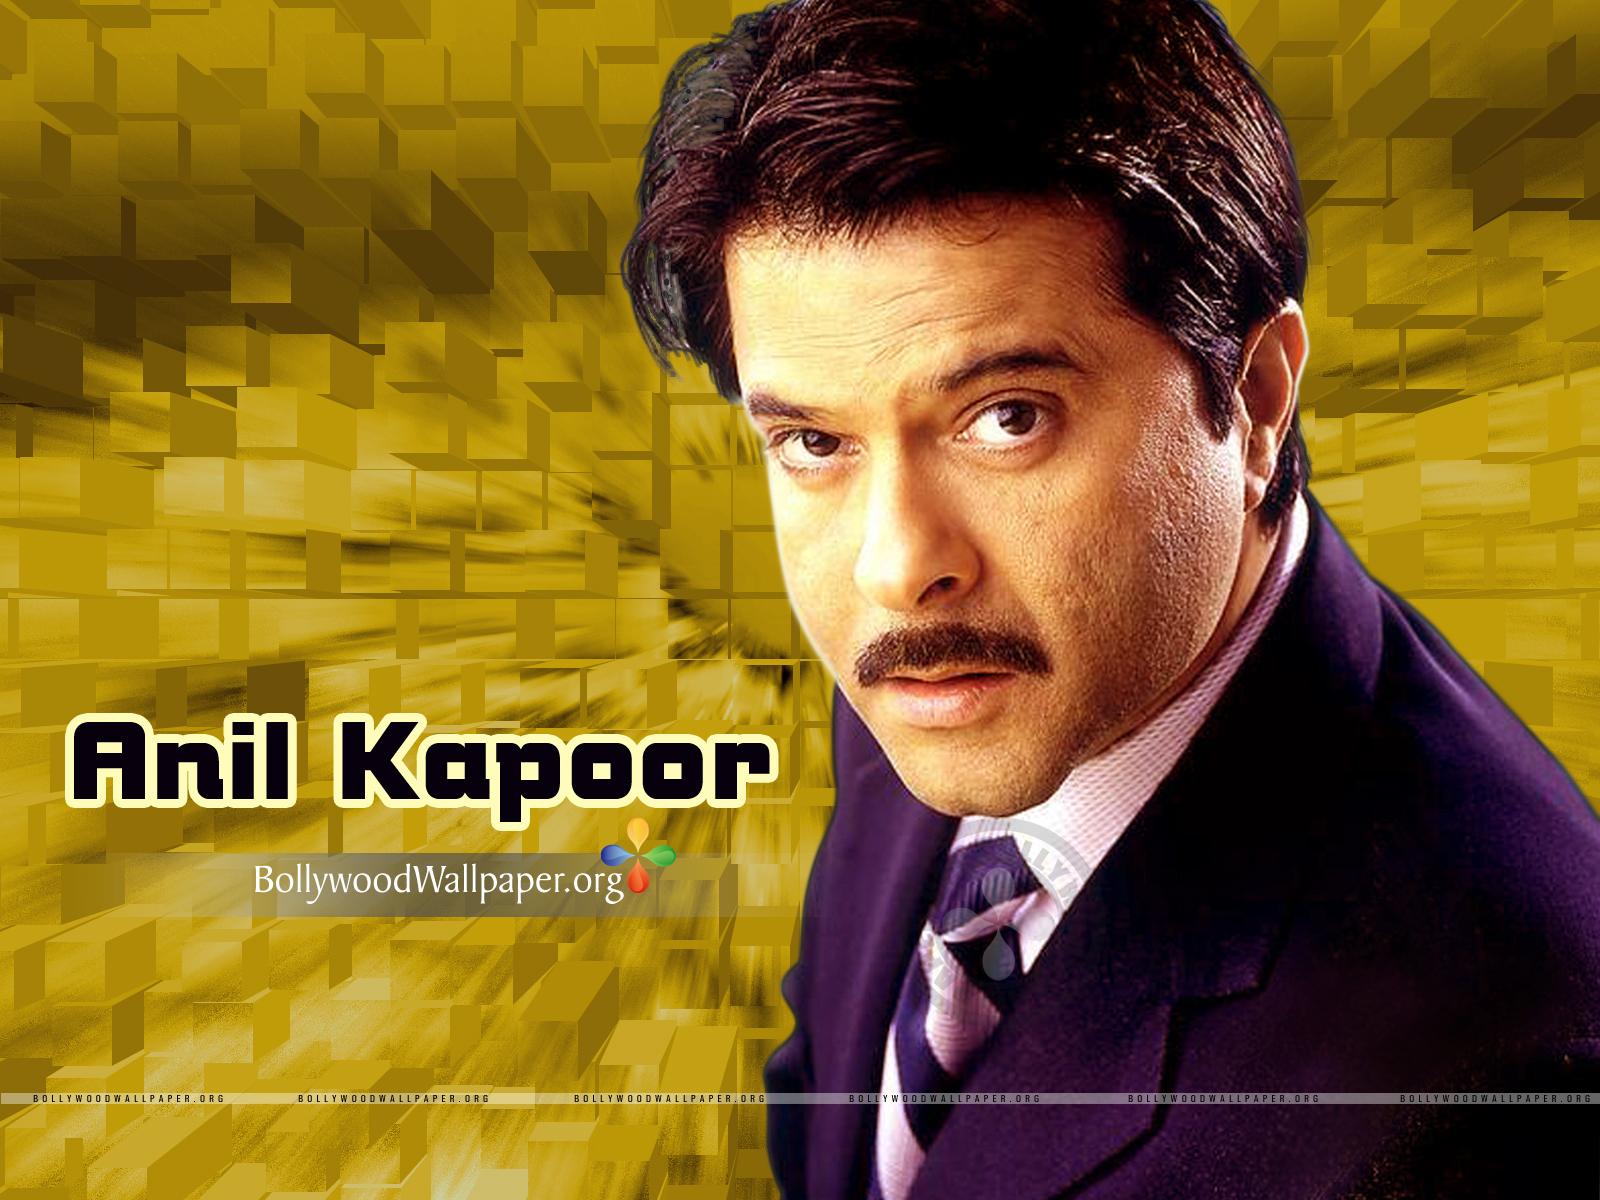 anil kapoor wallpaper,forehead,chin,movie,suit